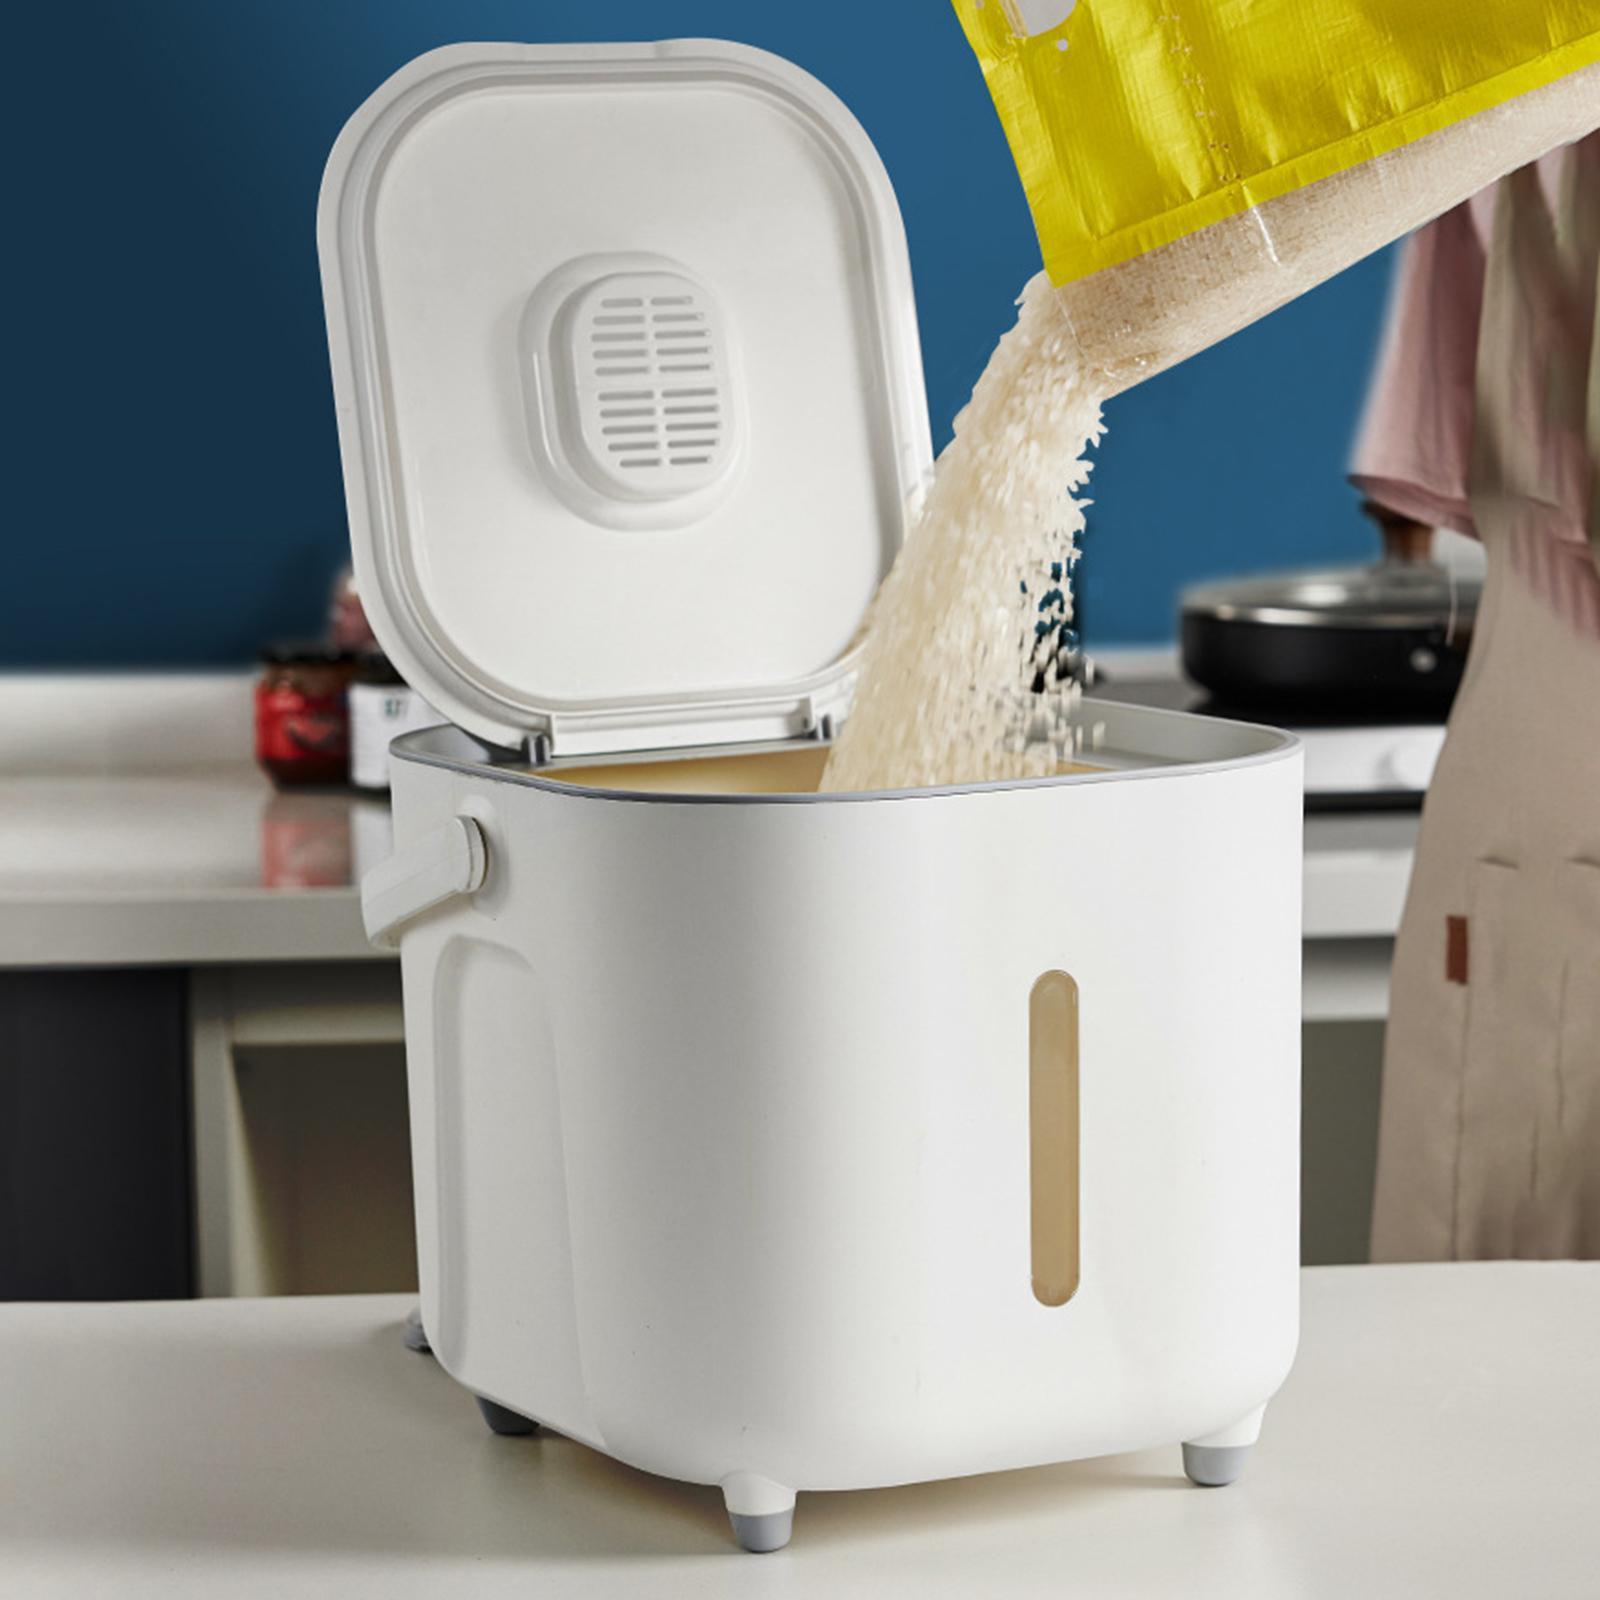 Multipurpose Rice Storage Bin Cereal Container Dispenser for Rice Flour Nuts